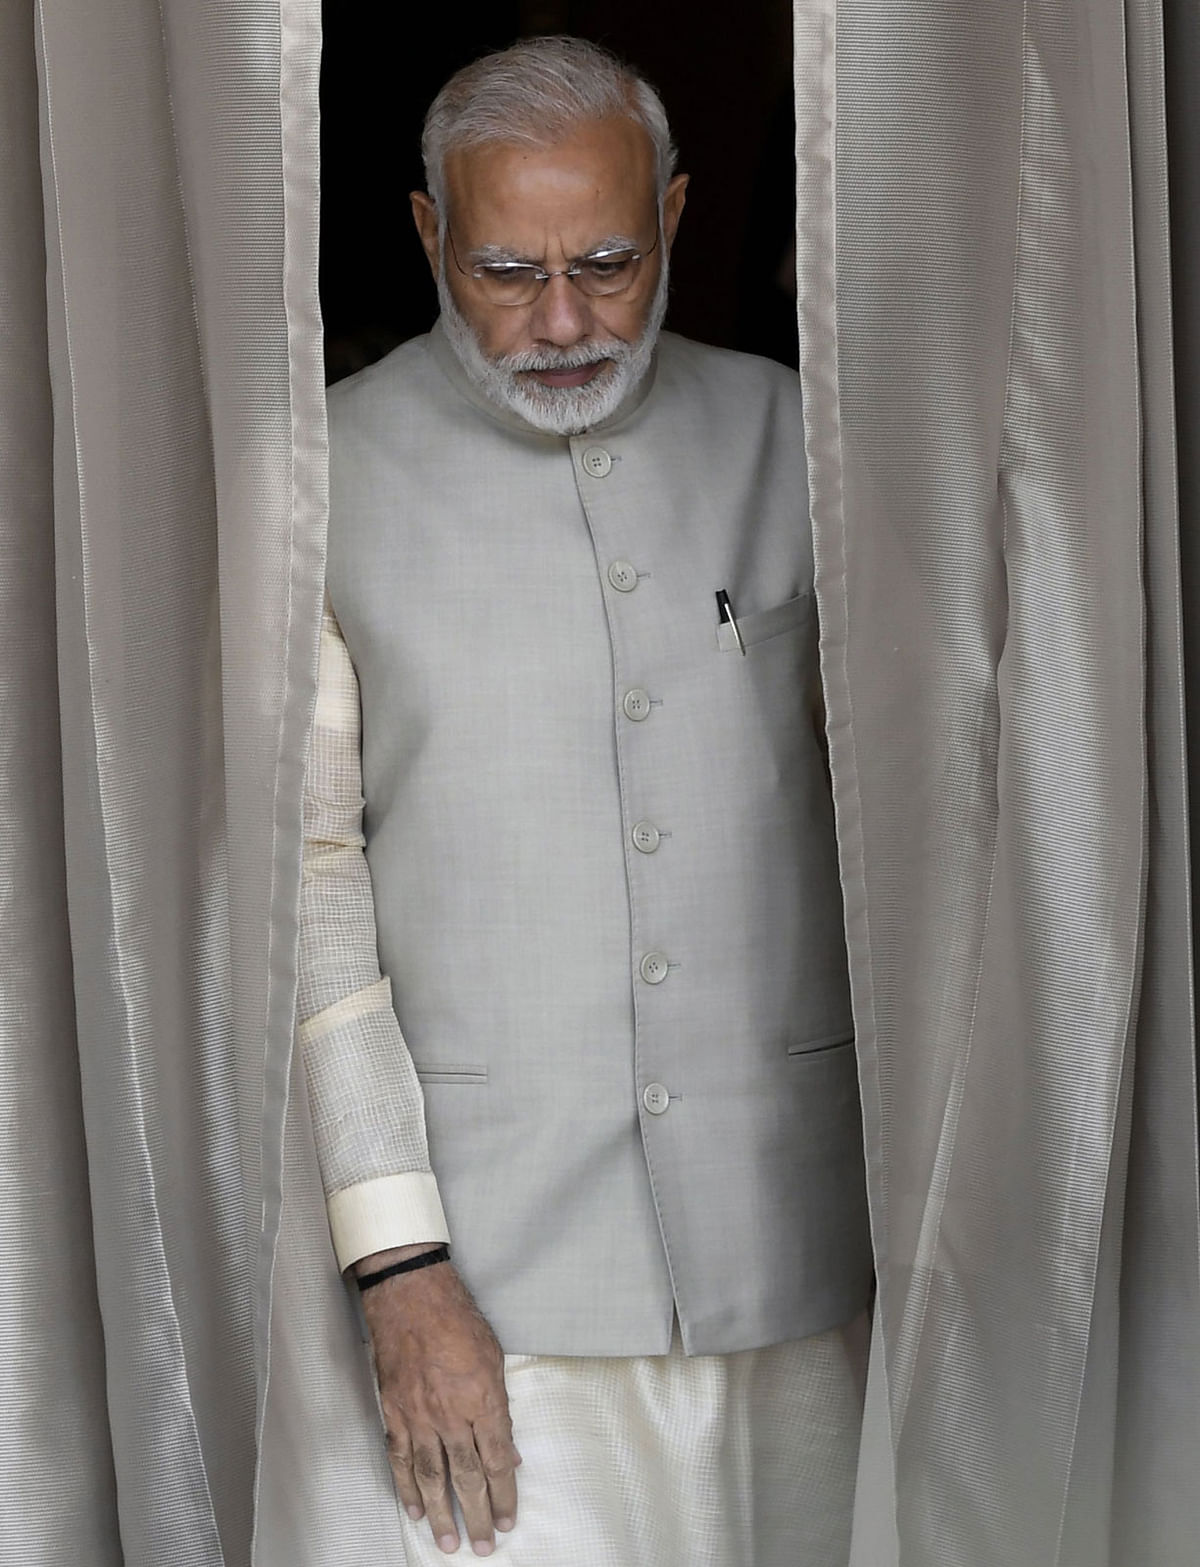 Indian prime minister Narendra Modi walks out before a meeting with Afghan President Mohammad Ashraf Ghani at Hyderabad House in New Delhi on 19 September. Photo: AFP